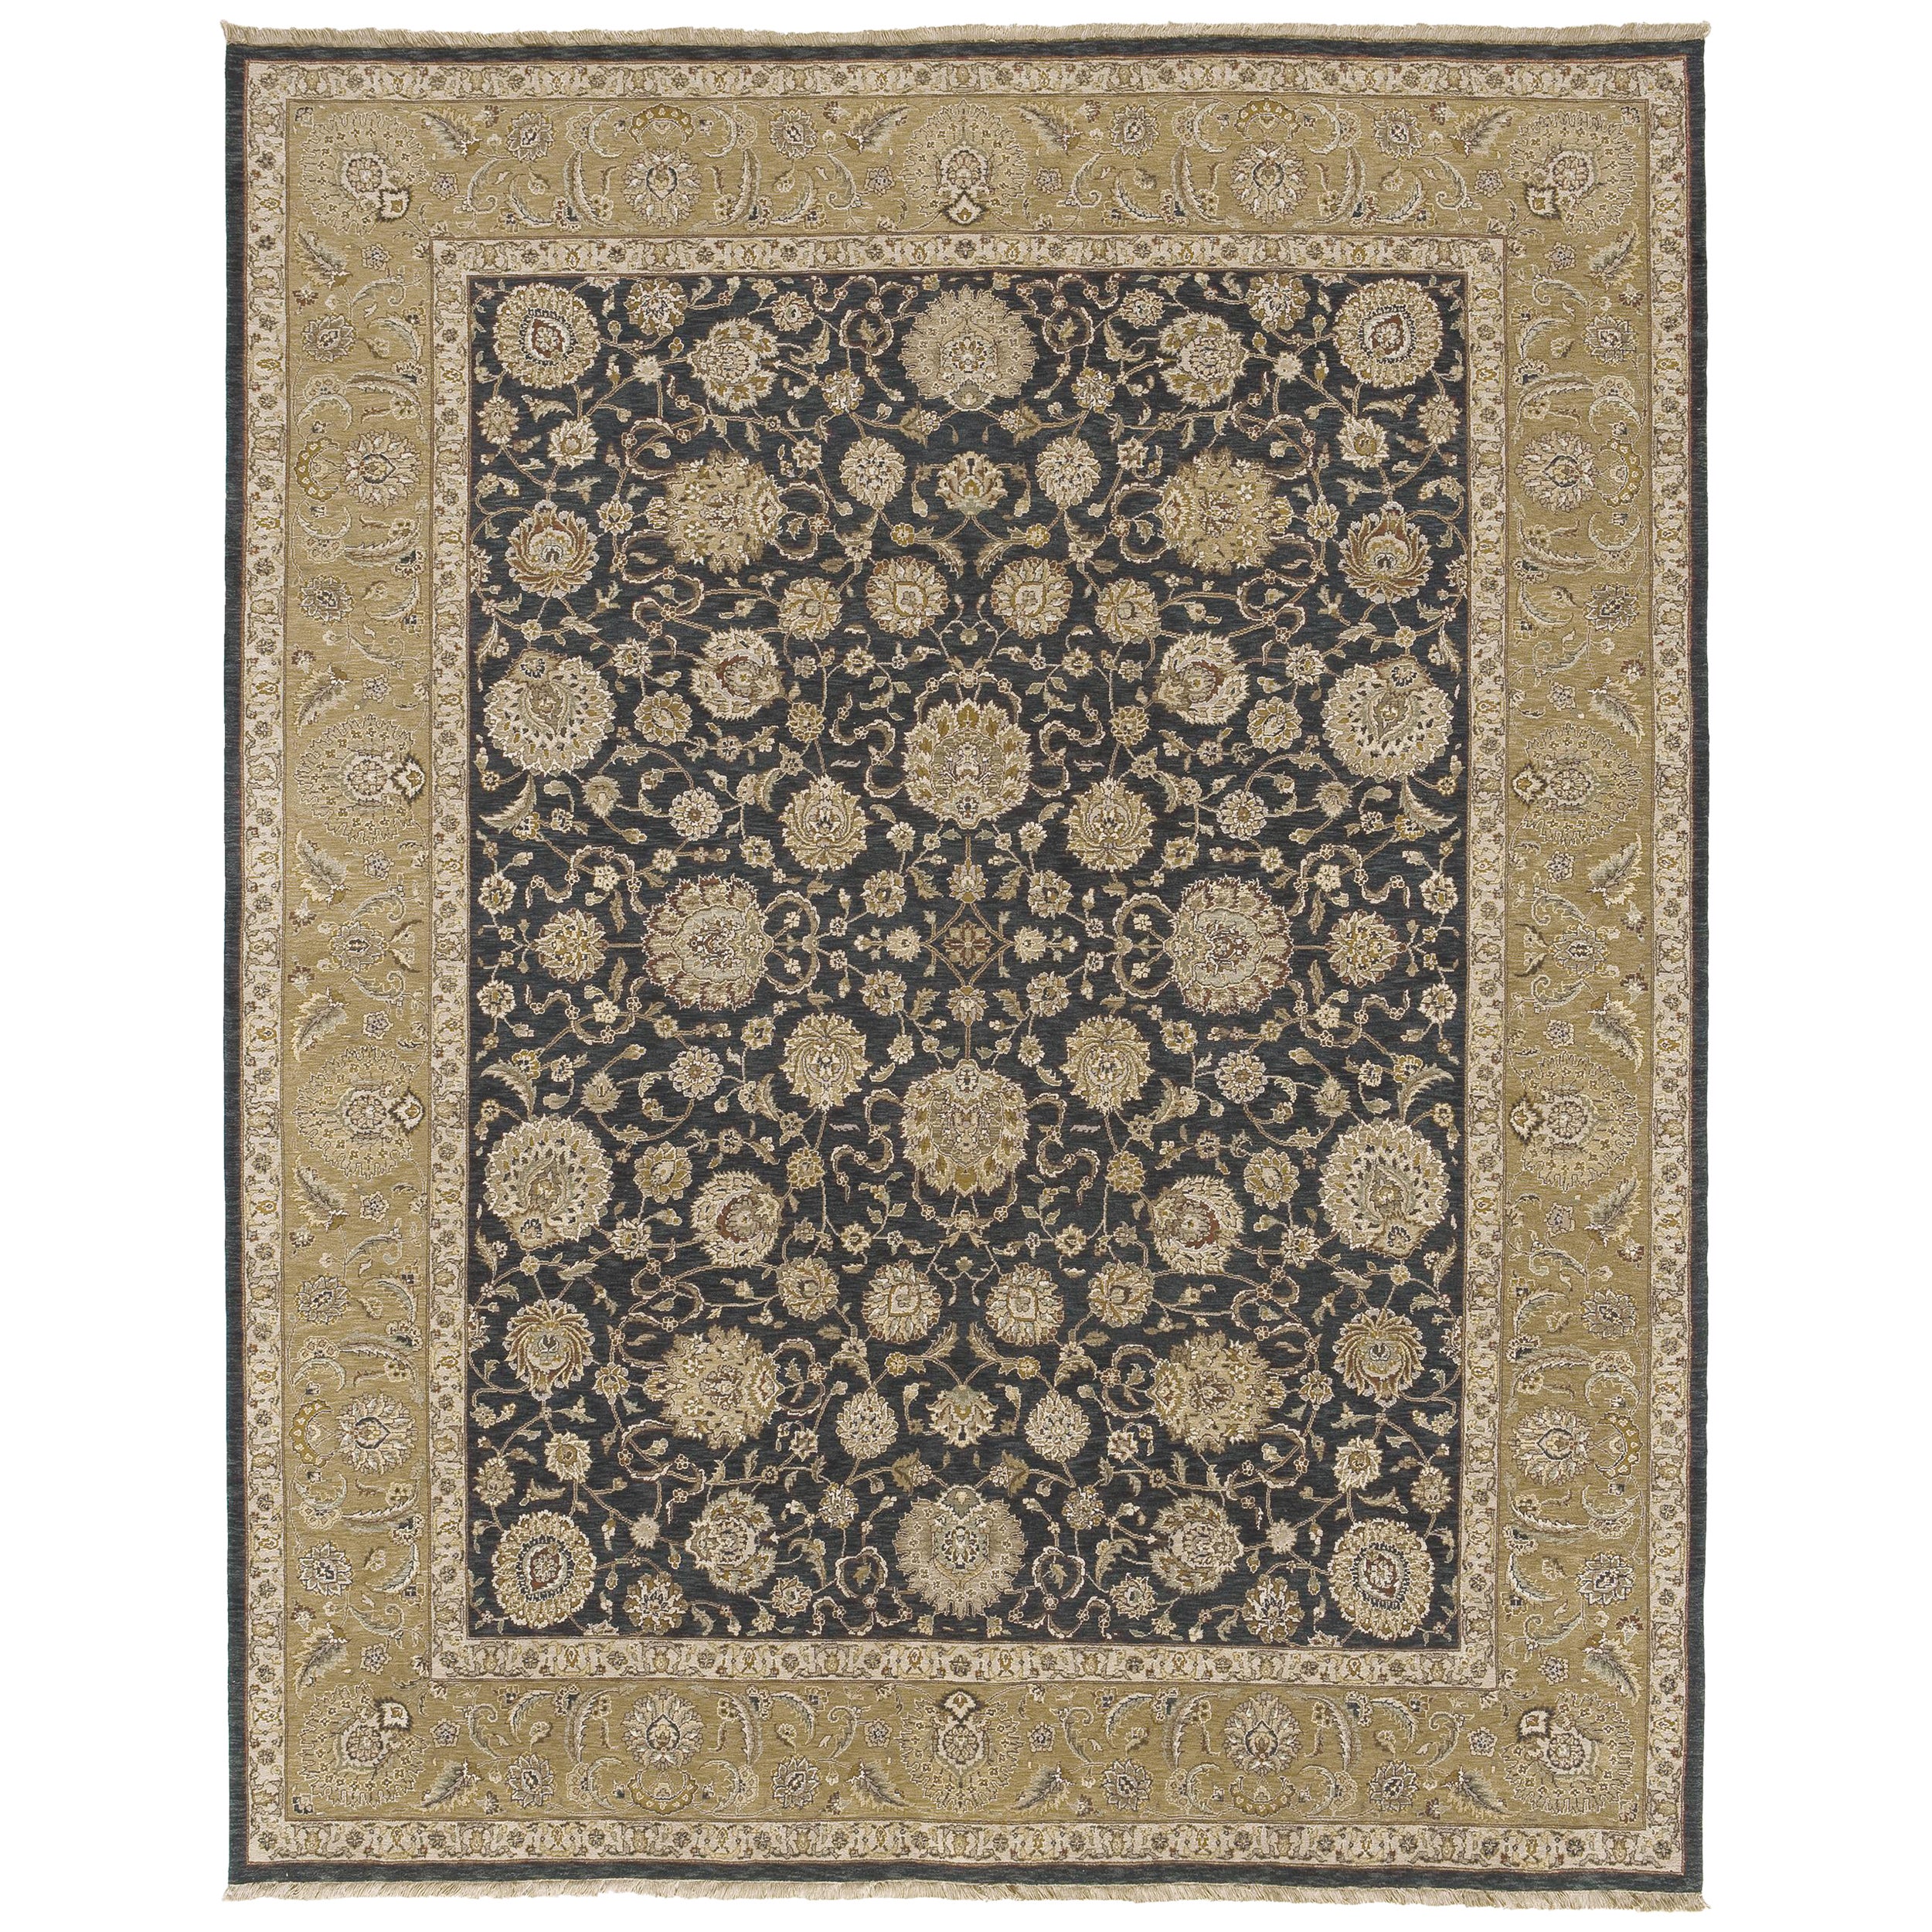 Luxury Traditional Hand-Knotted Kashan Black  & Gold 12x18 Rug